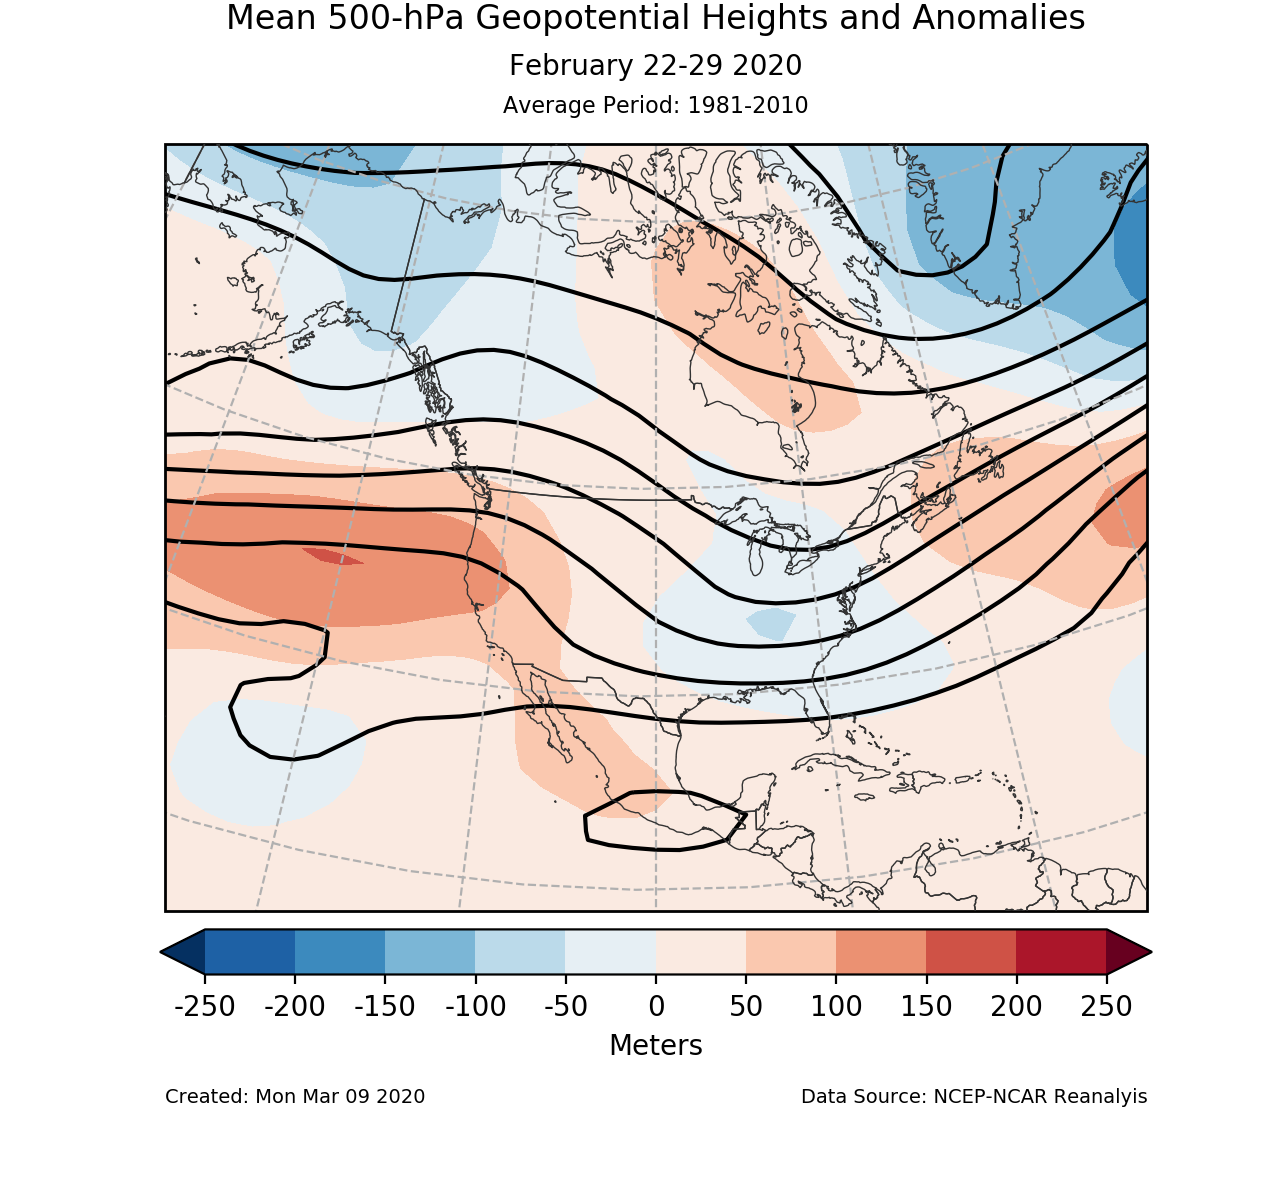 500-mb circulation anomalies for North America for February 22-29 2020